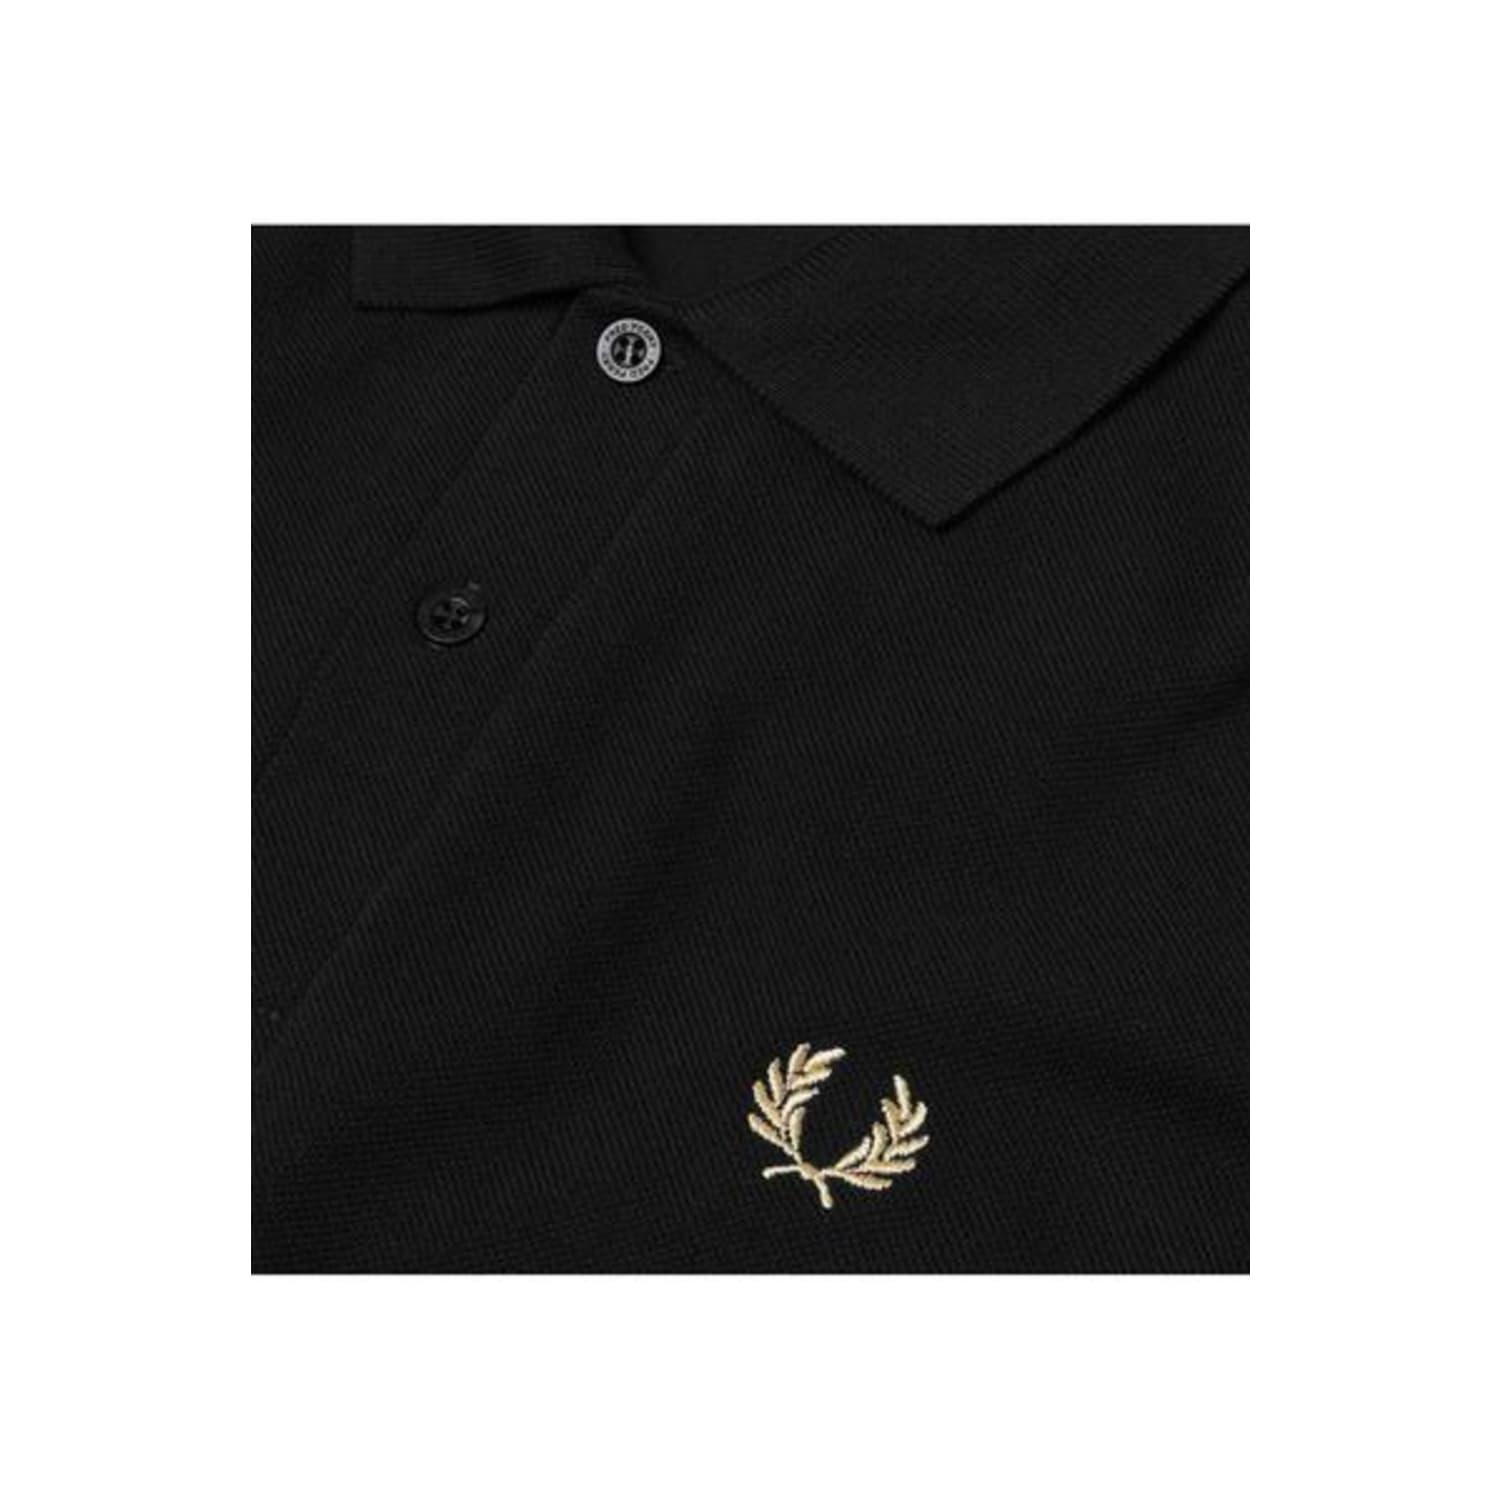 Fred Perry Cotton Black Champagne M 3 Polo Shirt for Men - Lyst